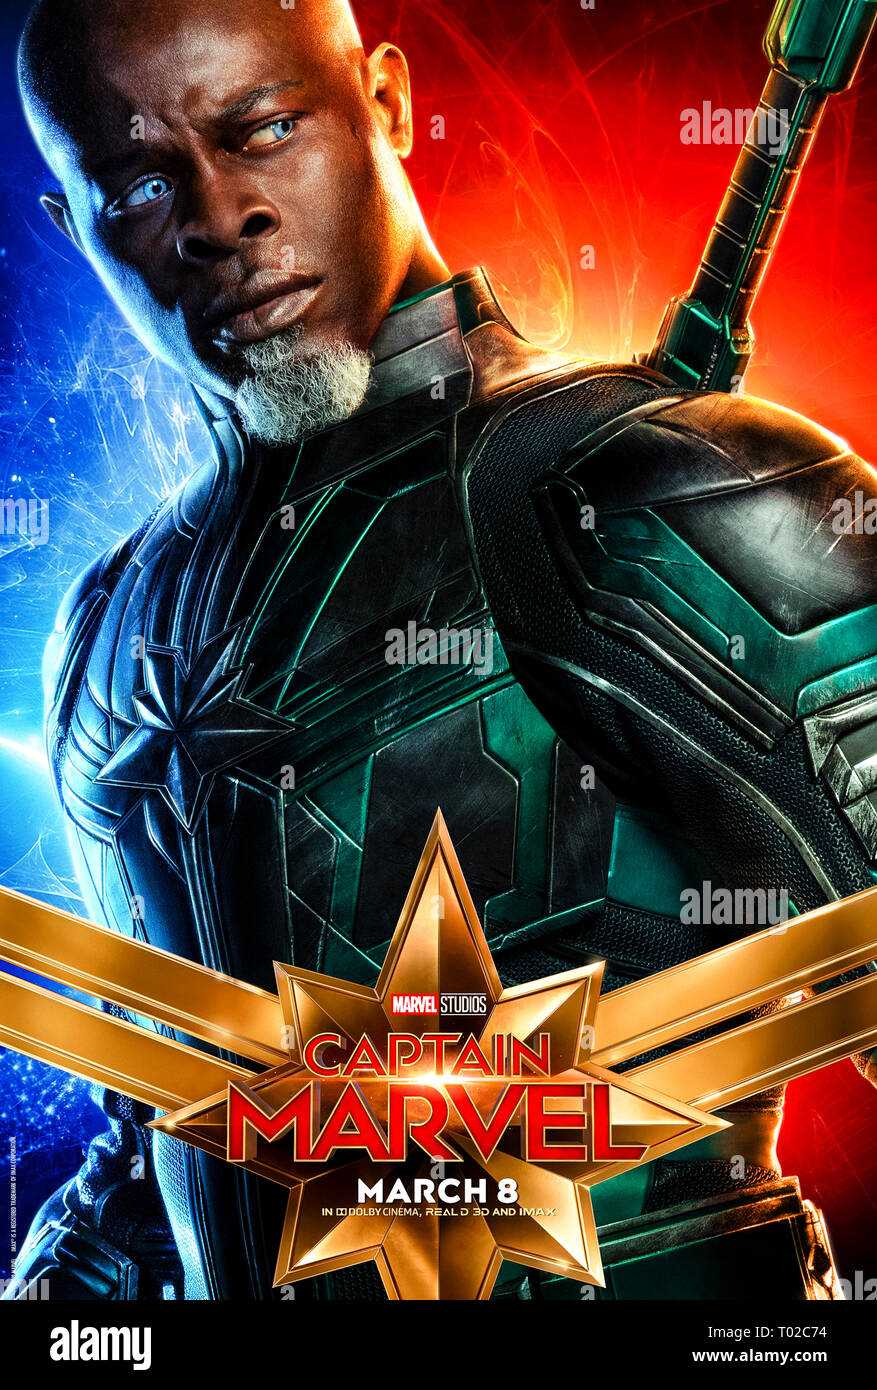 Korath (Djimon Hounsou) from Captain Marvel (2019) directed by Anna Boden and staring Djimon Hounsou as Korath, Kree swordsman and second-in-command of Starforce. Stock Photo